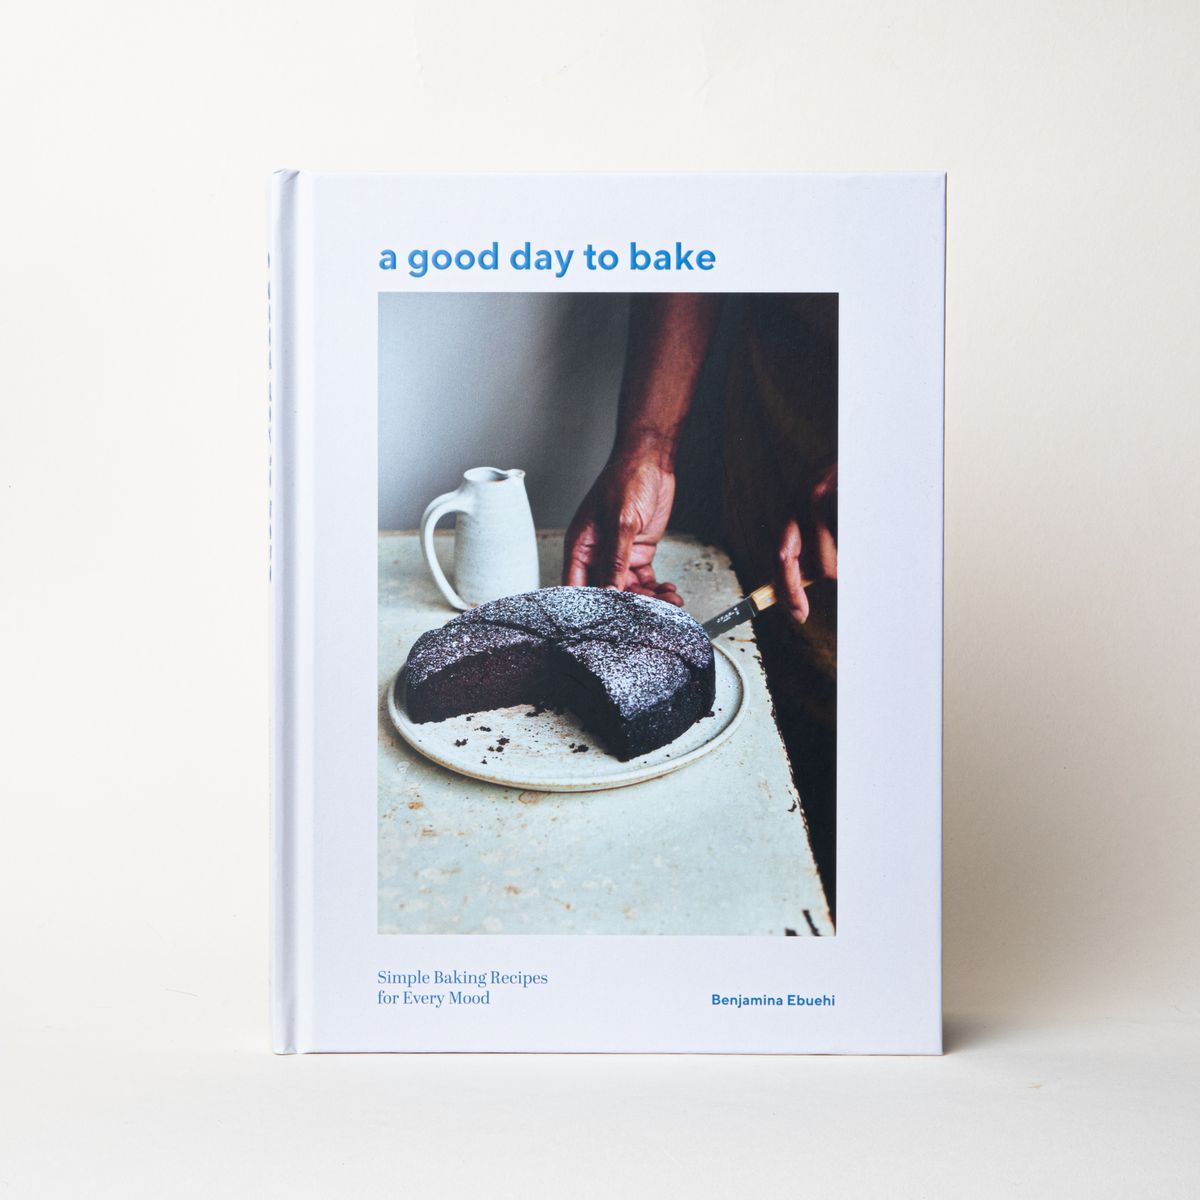 A book with a white cover and a large photo of a person cutting a cake with a title that reads "a good day to bake"